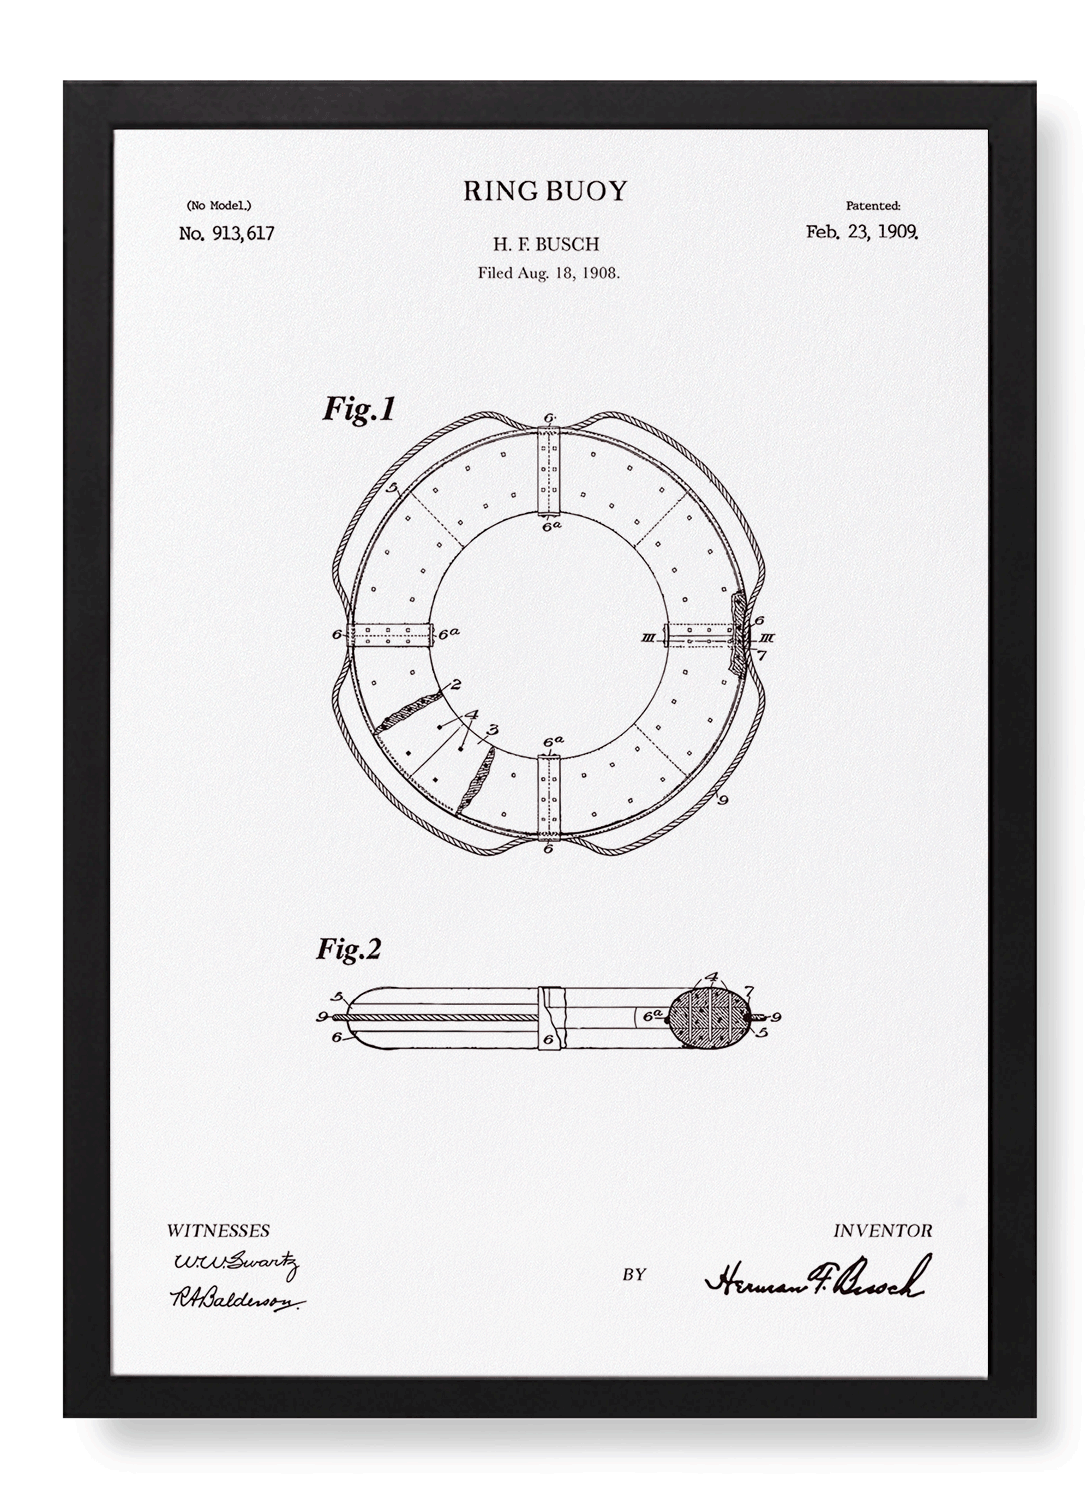 PATENT OF RING BUOY (1909)